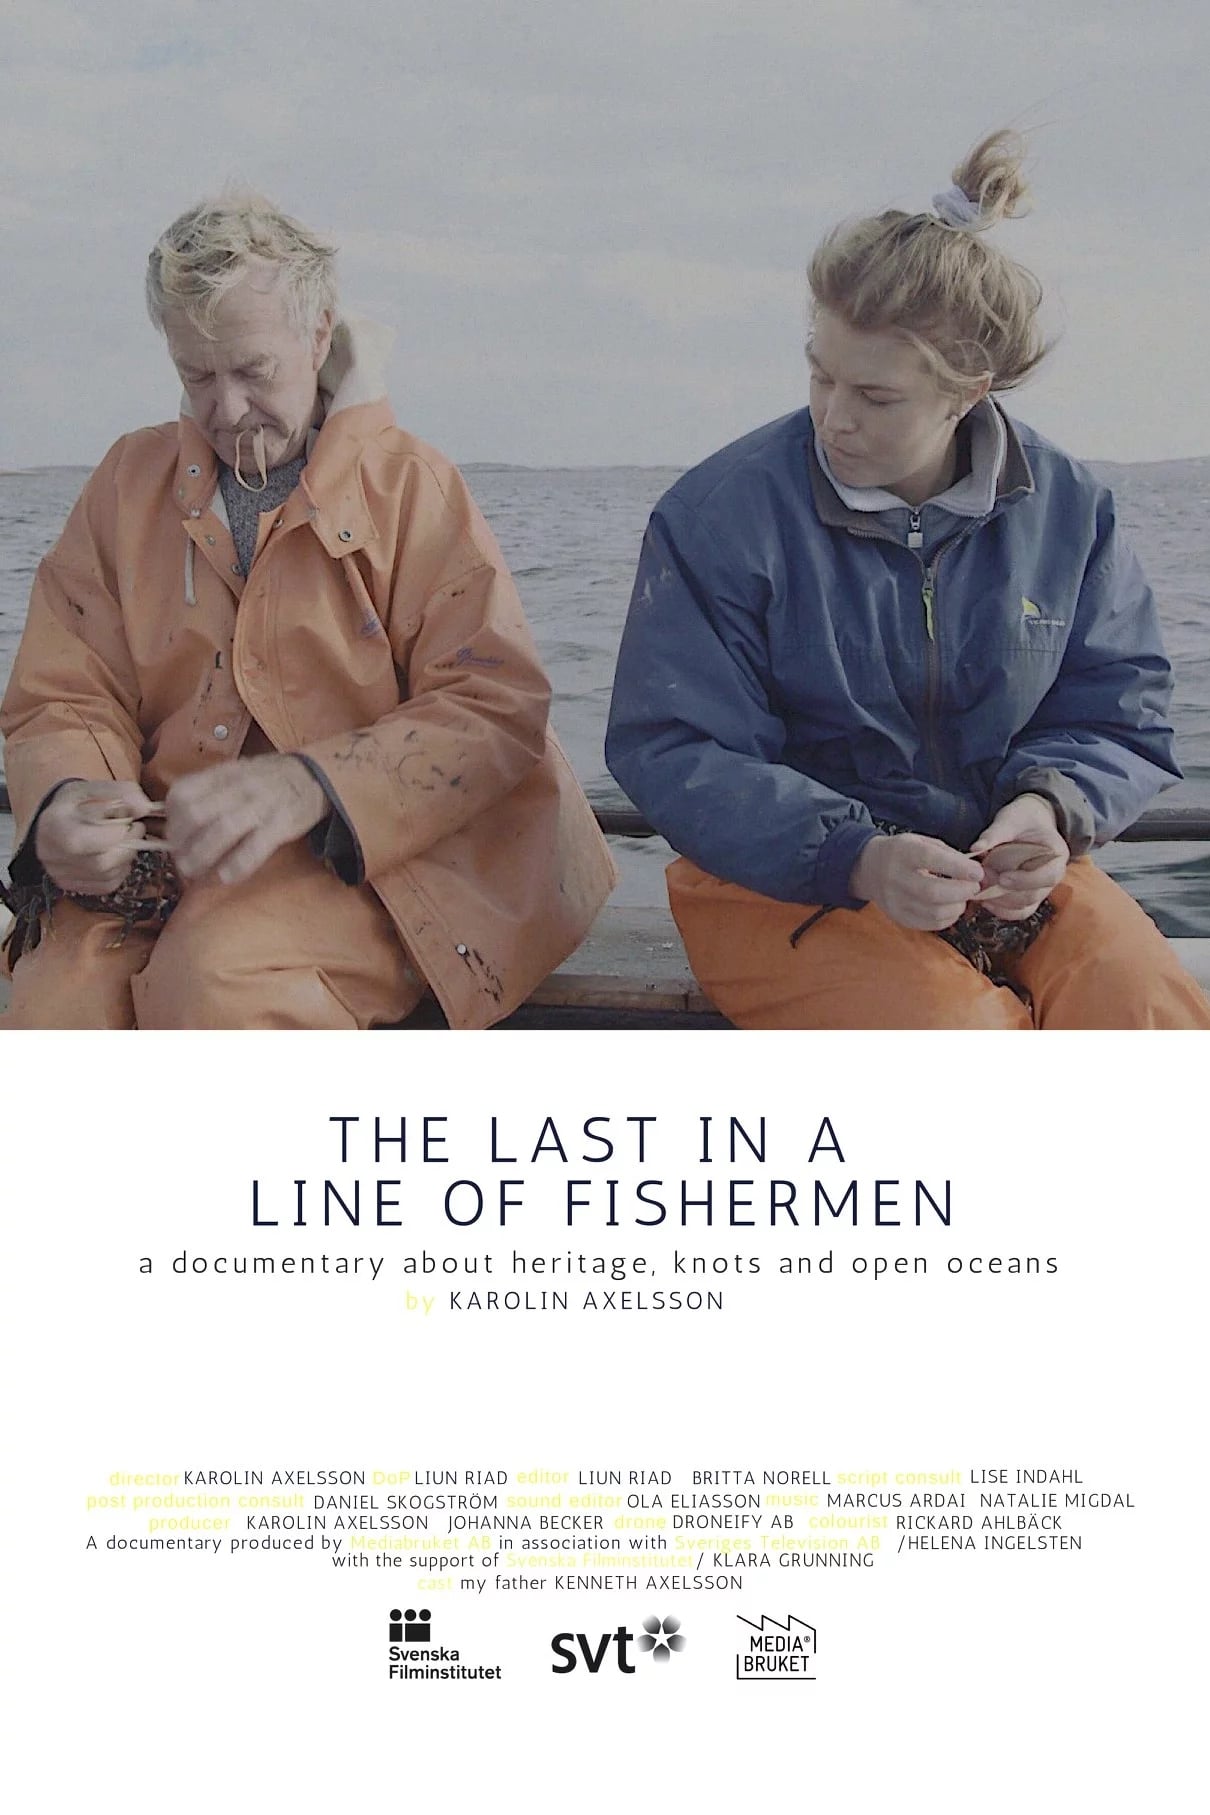 The Last in a Line of Fishermen